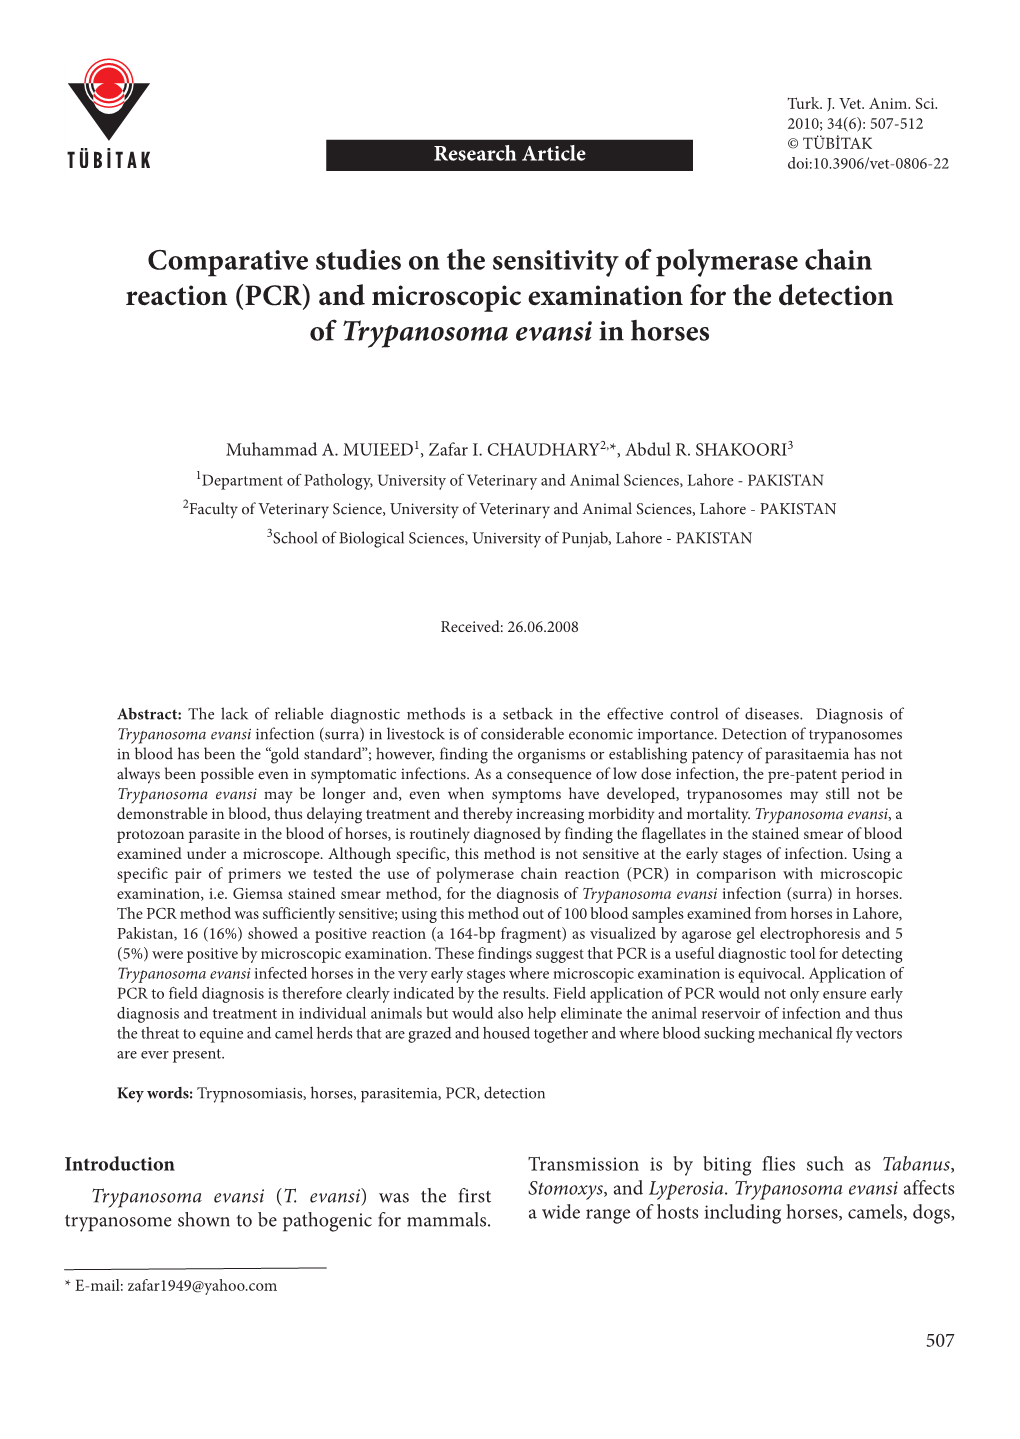 Comparative Studies on the Sensitivity of Polymerase Chain Reaction (PCR) and Microscopic Examination for the Detection of Trypanosoma Evansi in Horses